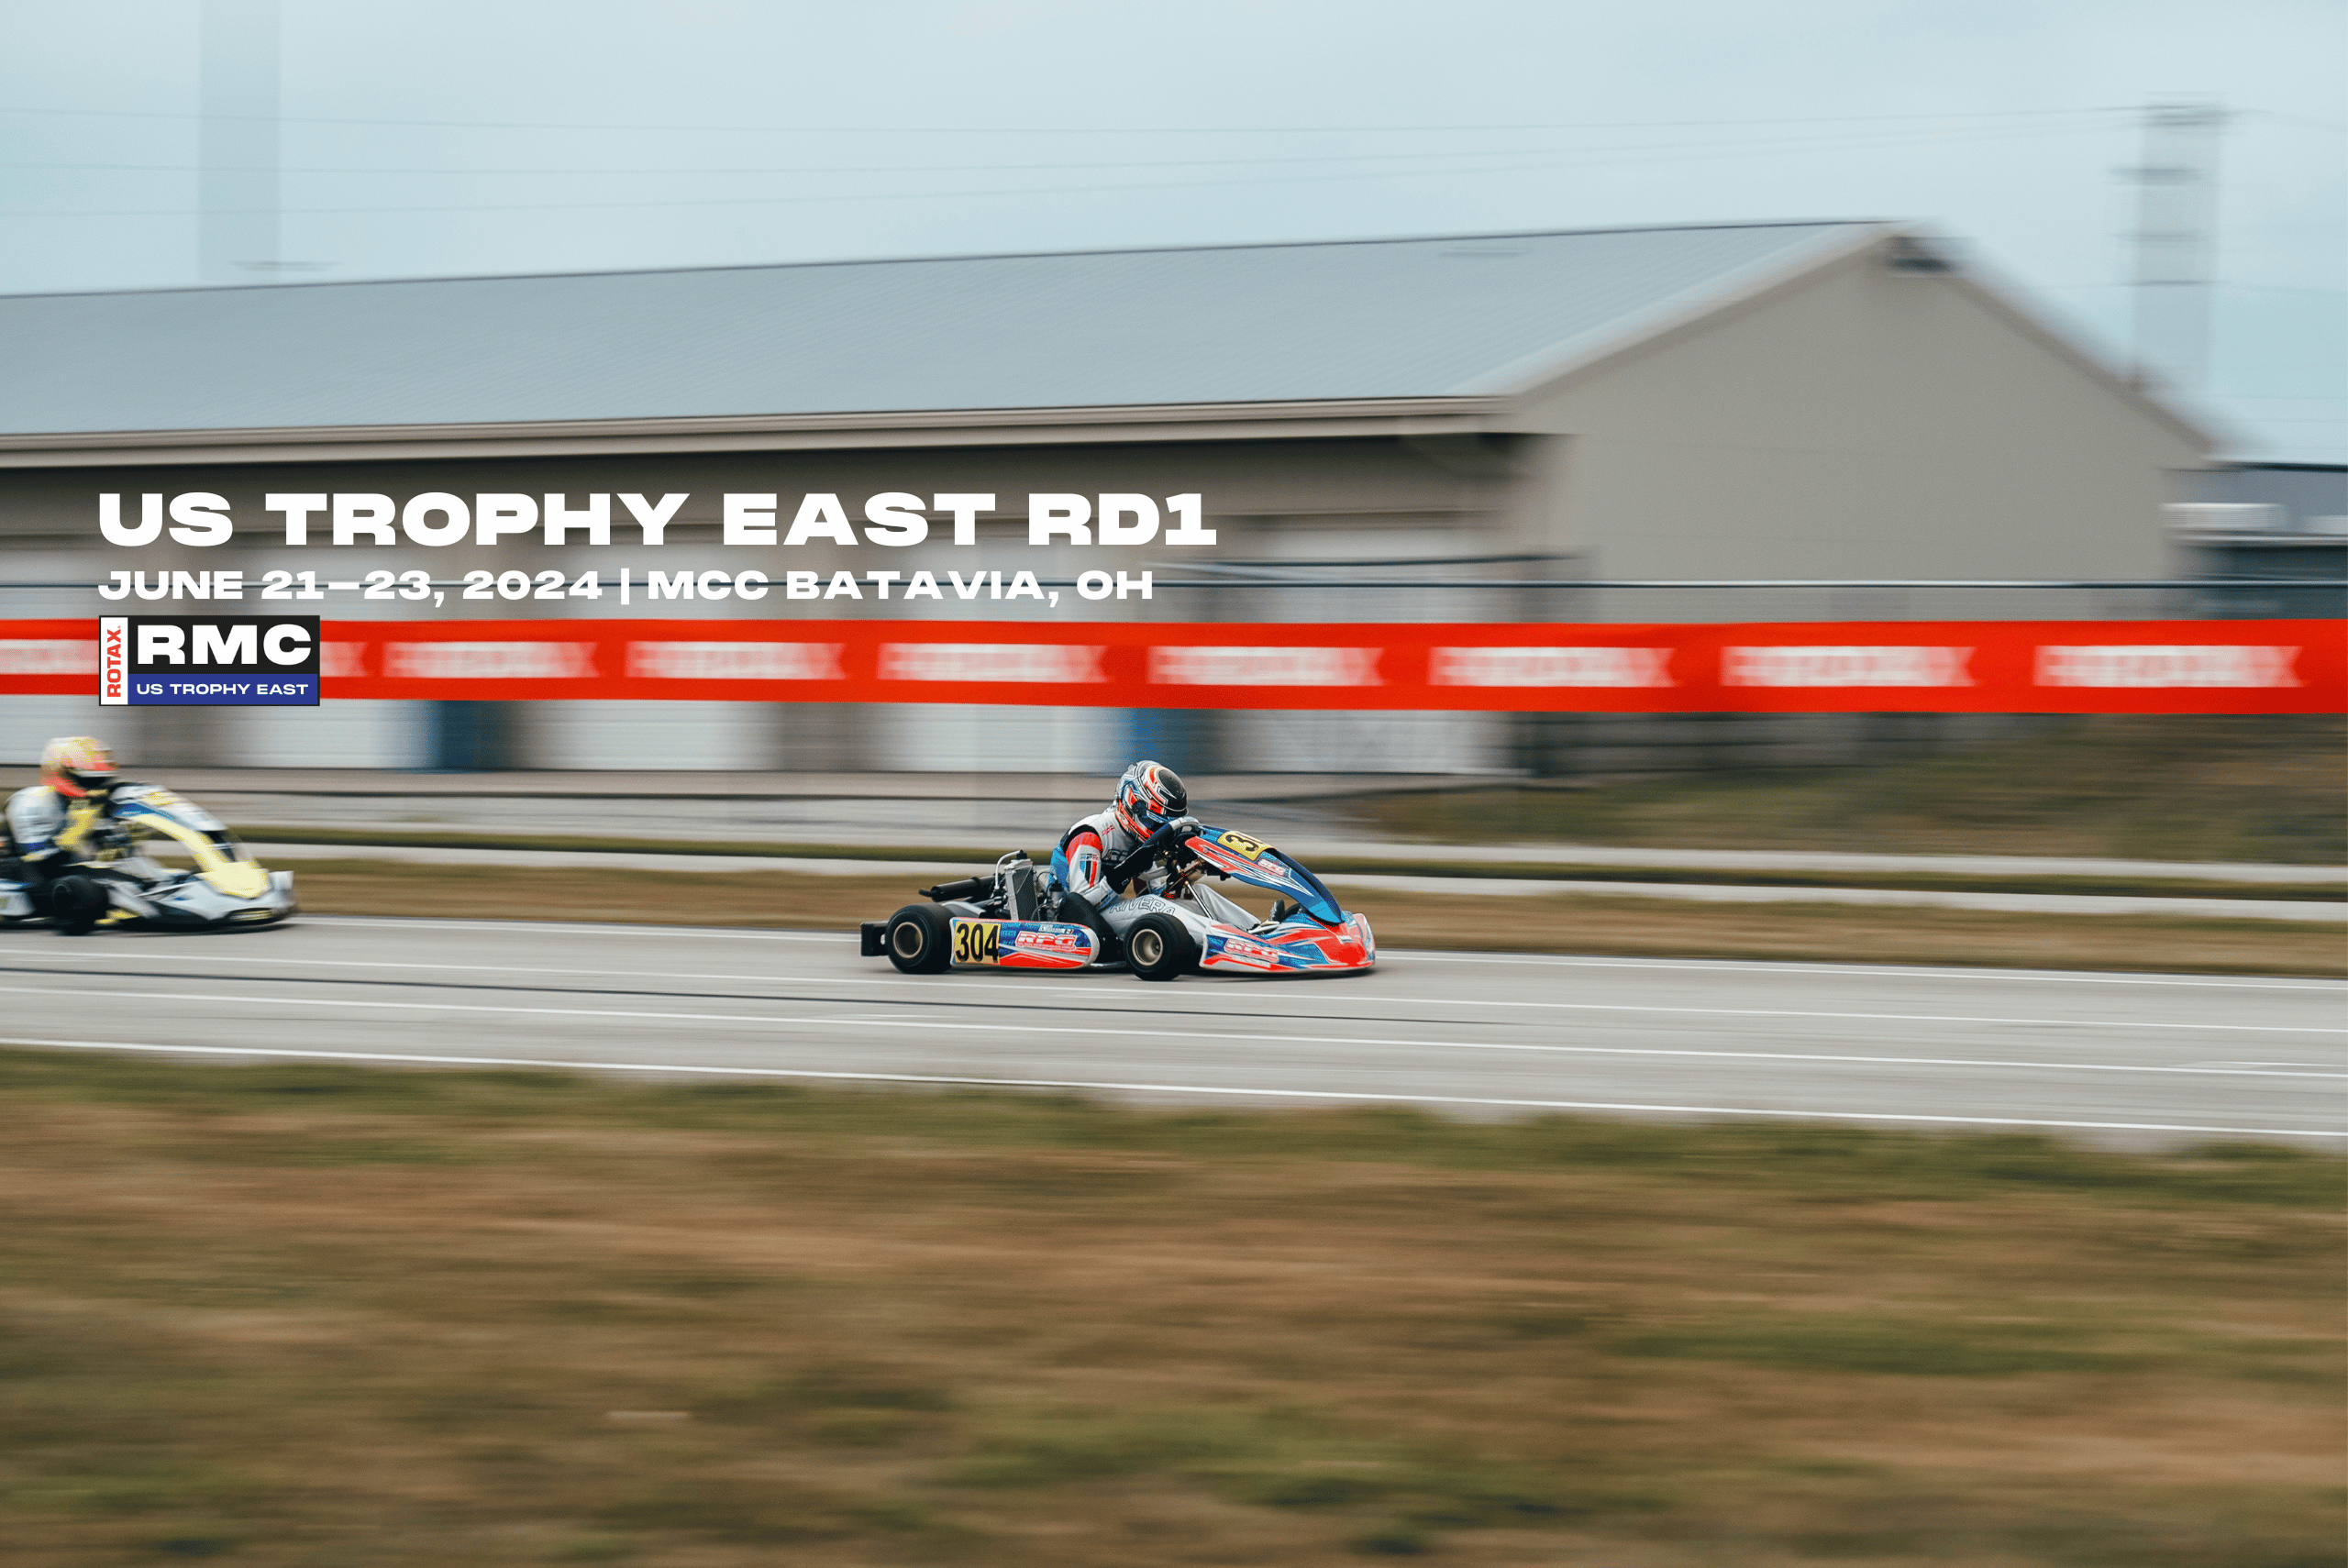 US Trophy East Round 1